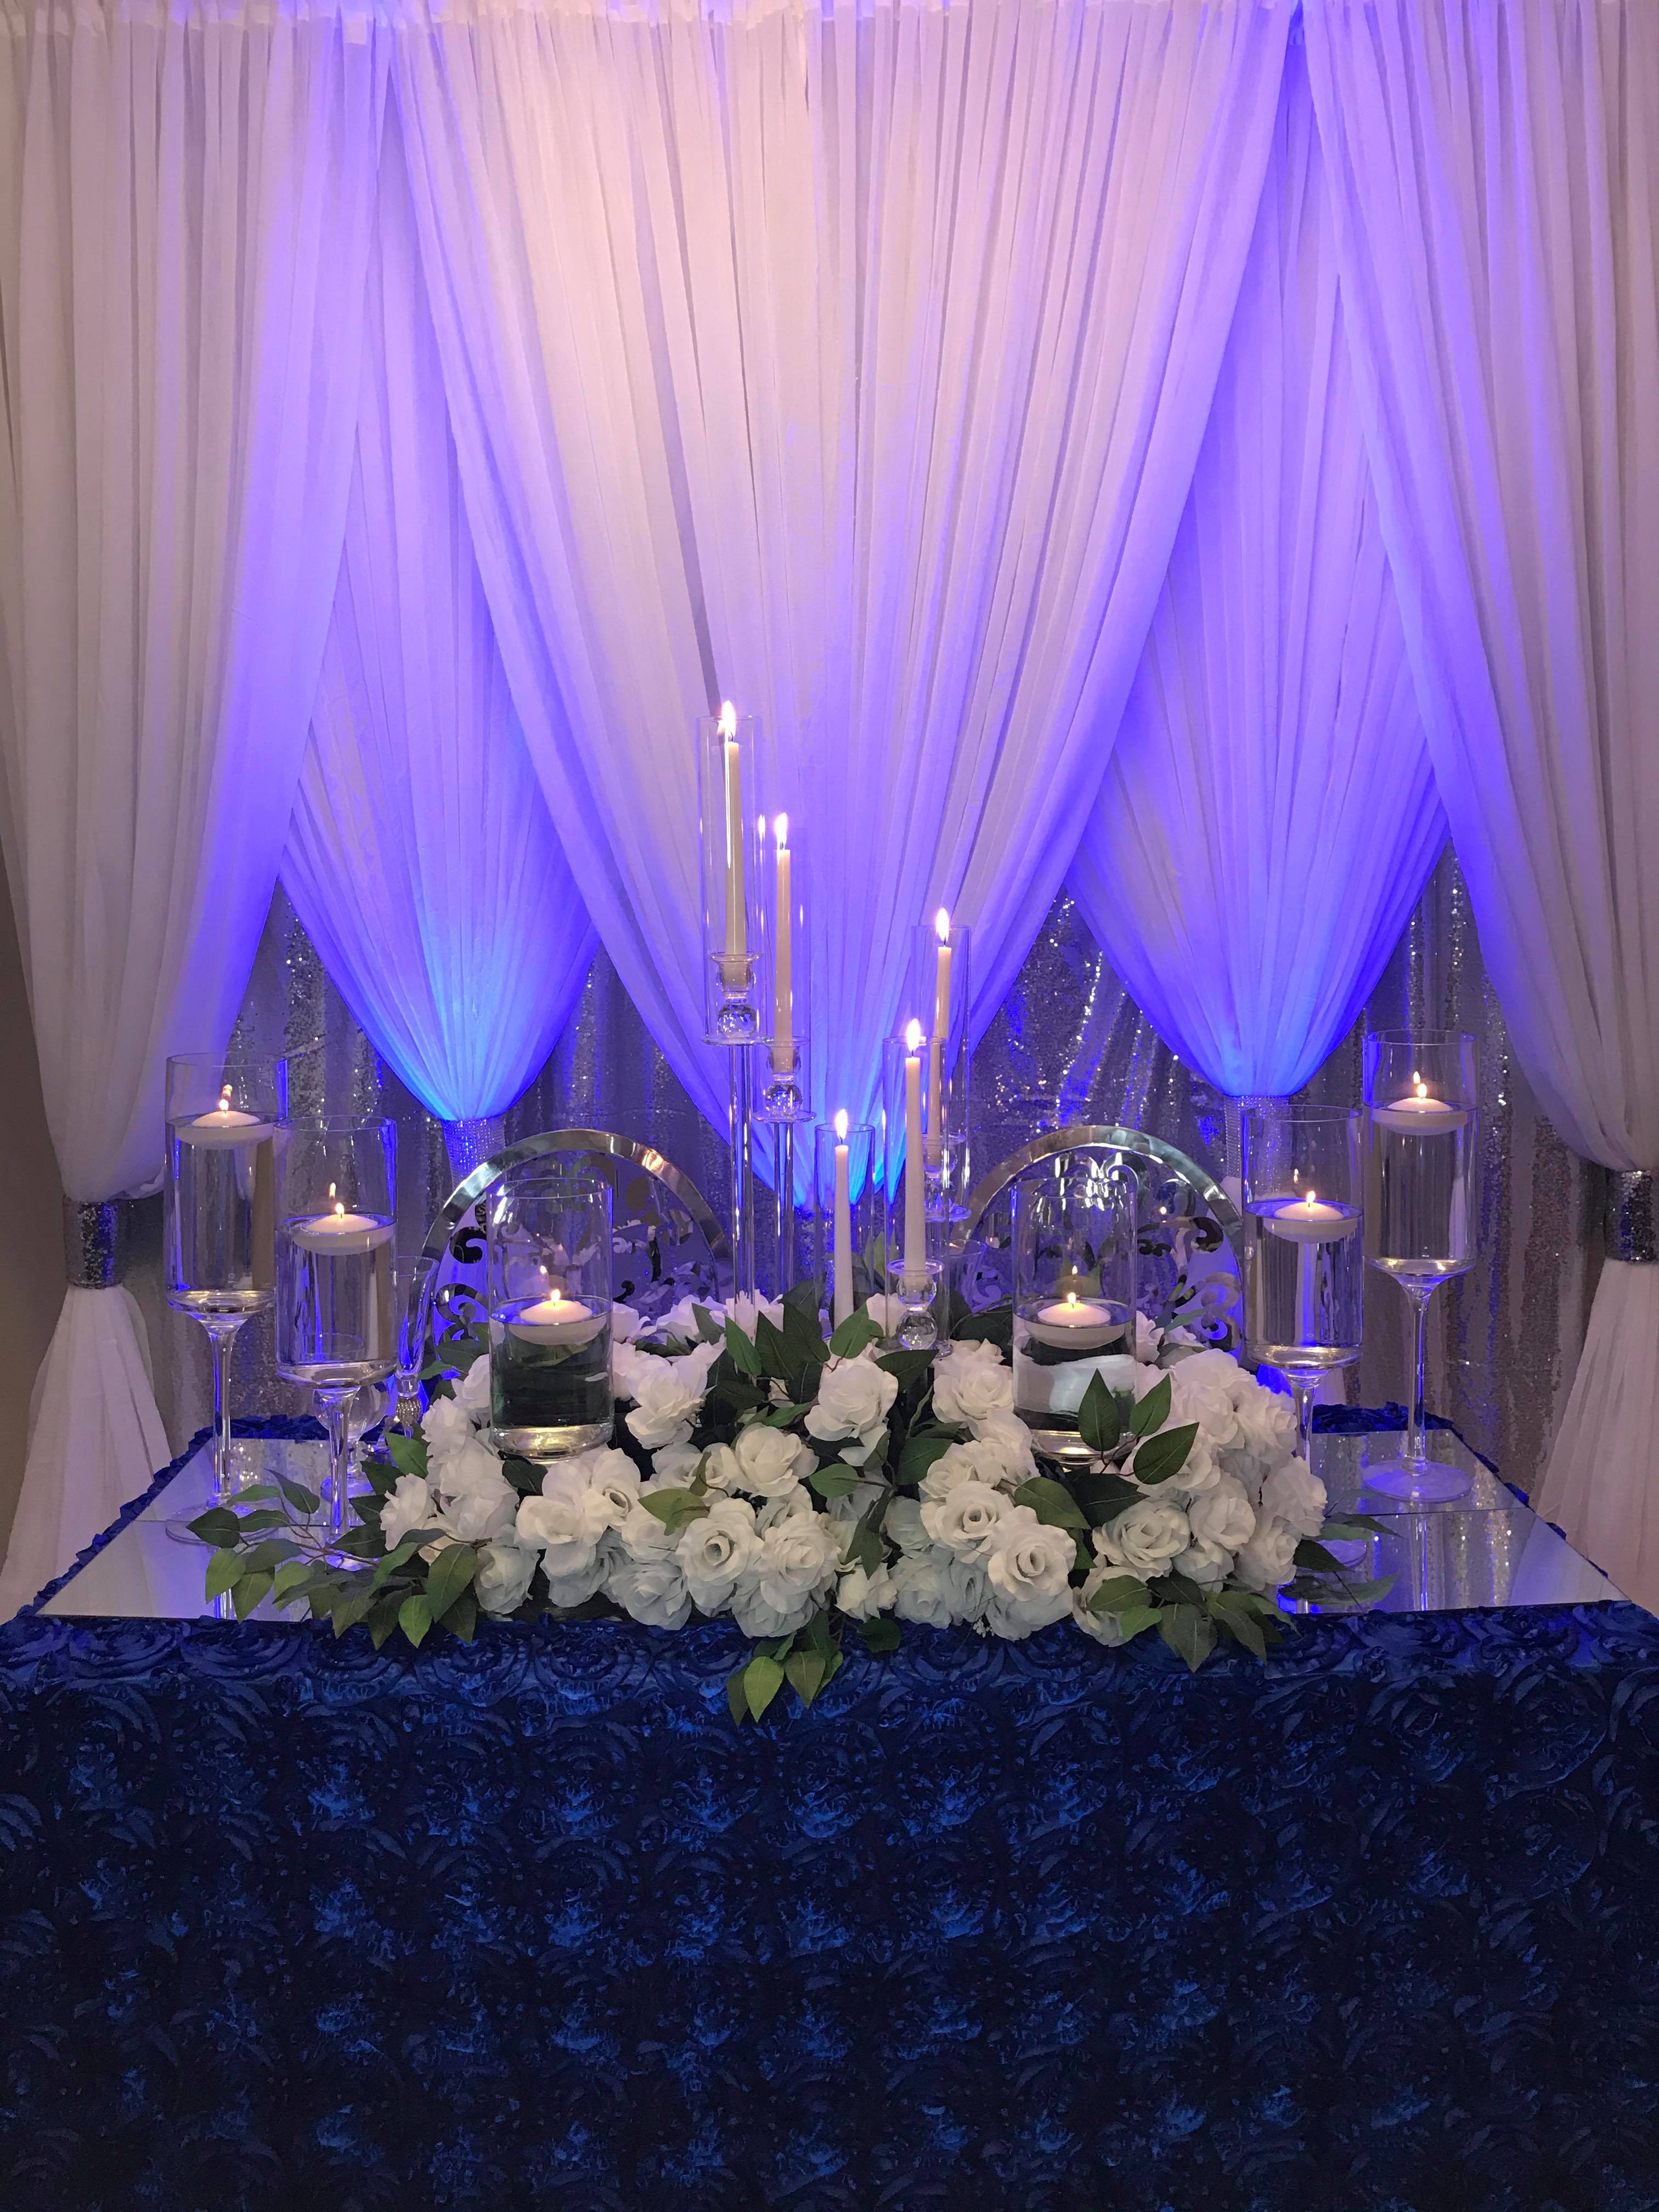 A sweetheart table with white florals and candles, set against a backdrop of white drapes. ADTR.